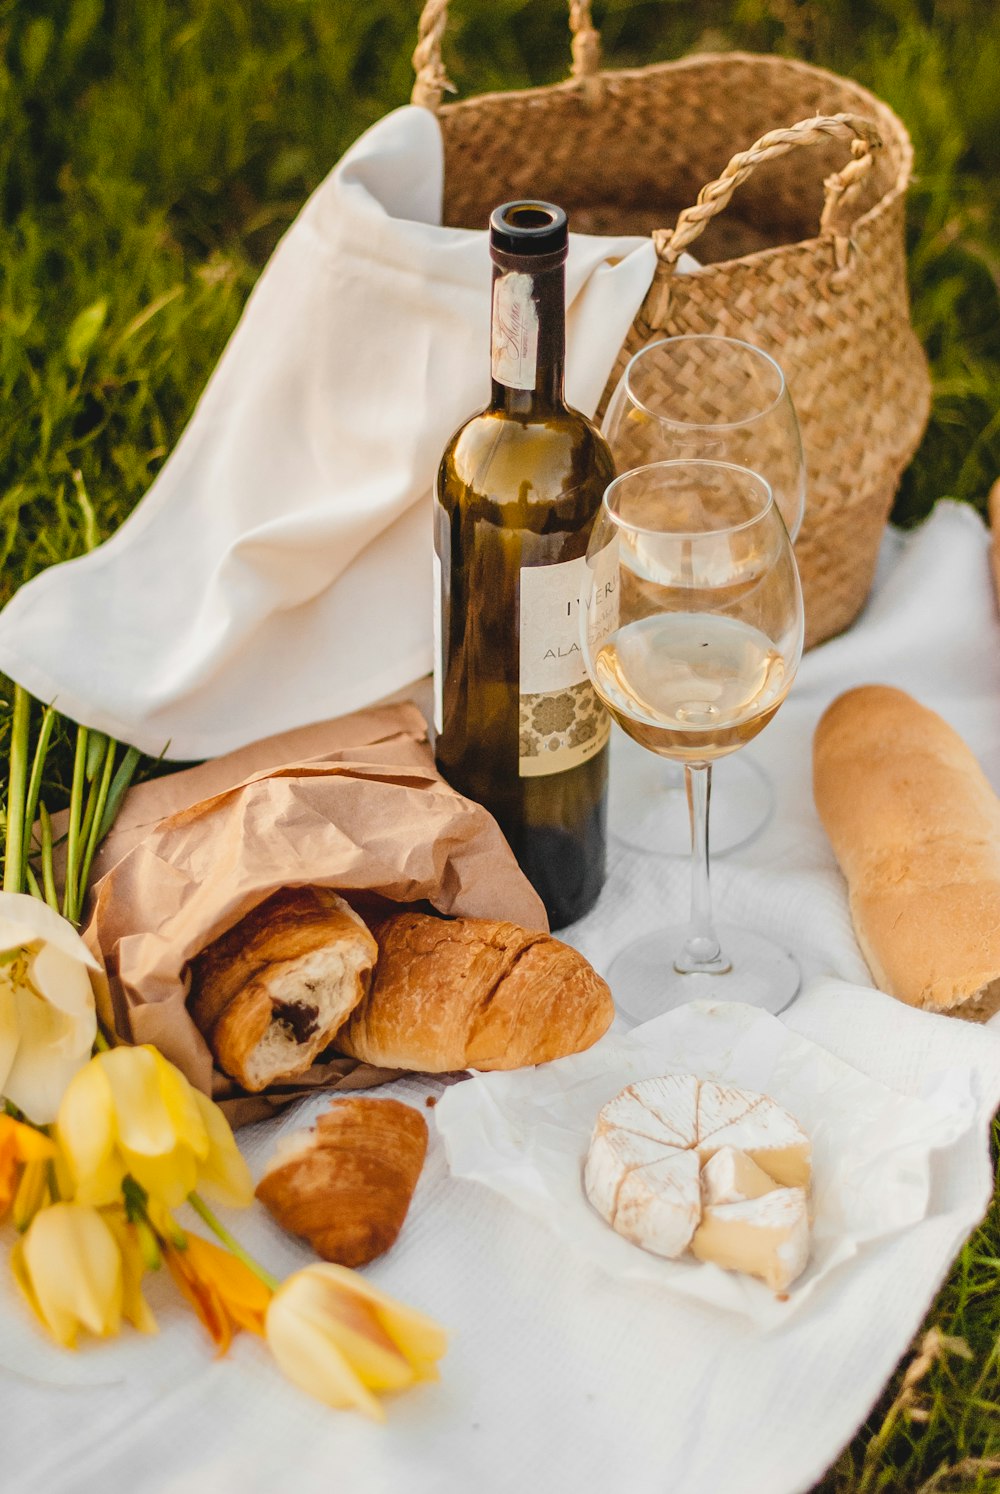 bread and wine bottle on table